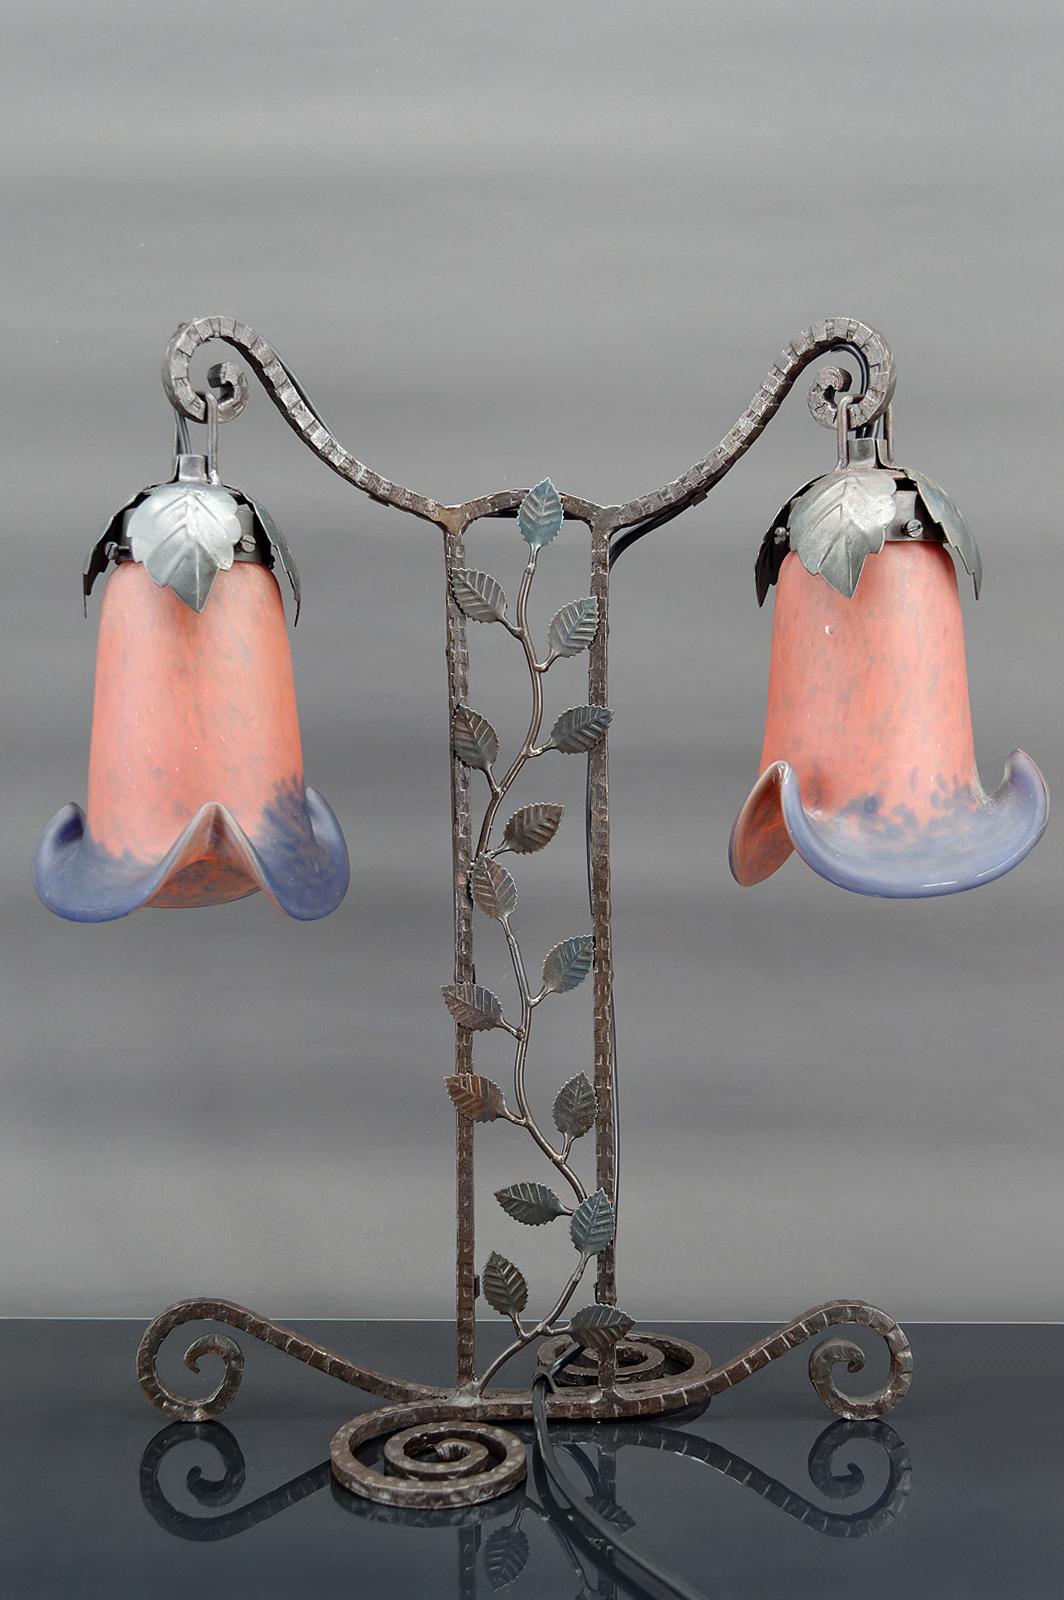 Two-headed lamp in wrought iron by Muller.

Art Deco, France, Circa 1920.

Floral theme.
Wrought iron base depicting a climbing plant.
Pink and blue tulips.

2 lights.

In very good condition, new electricity.

Dimensions:
height 48 cm
width 40